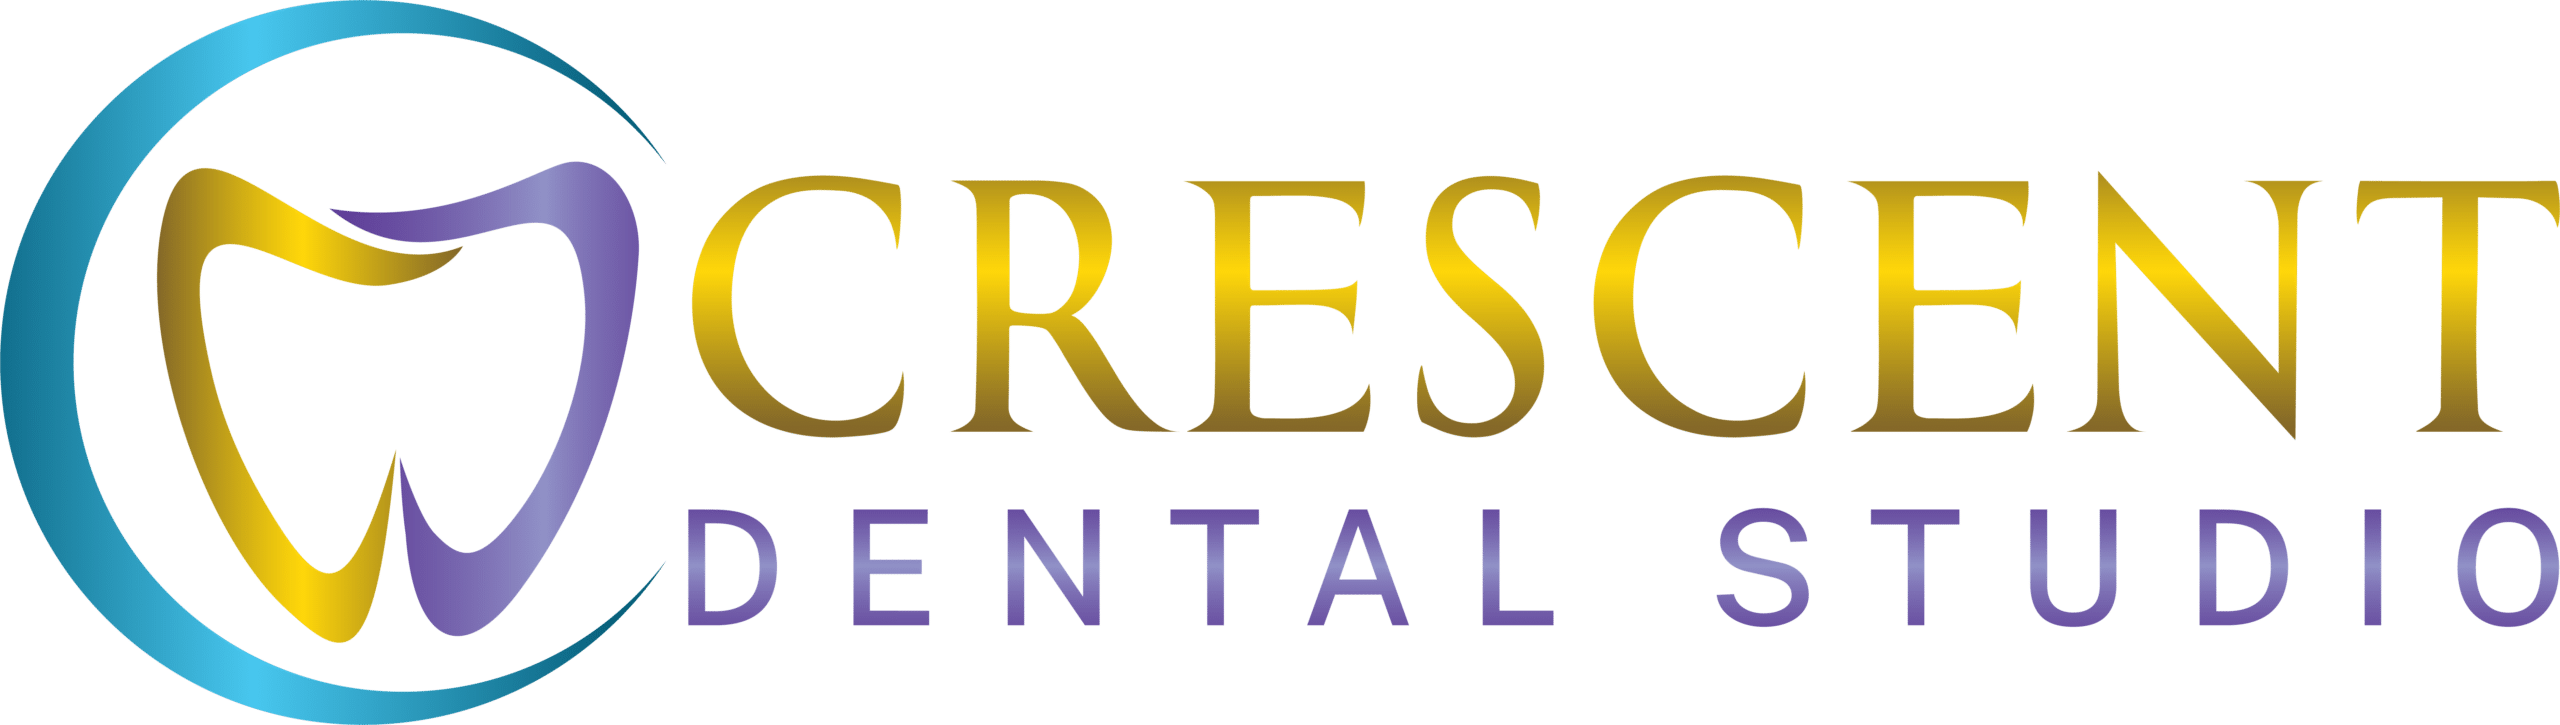 crescent dental full logo with icon and name in color